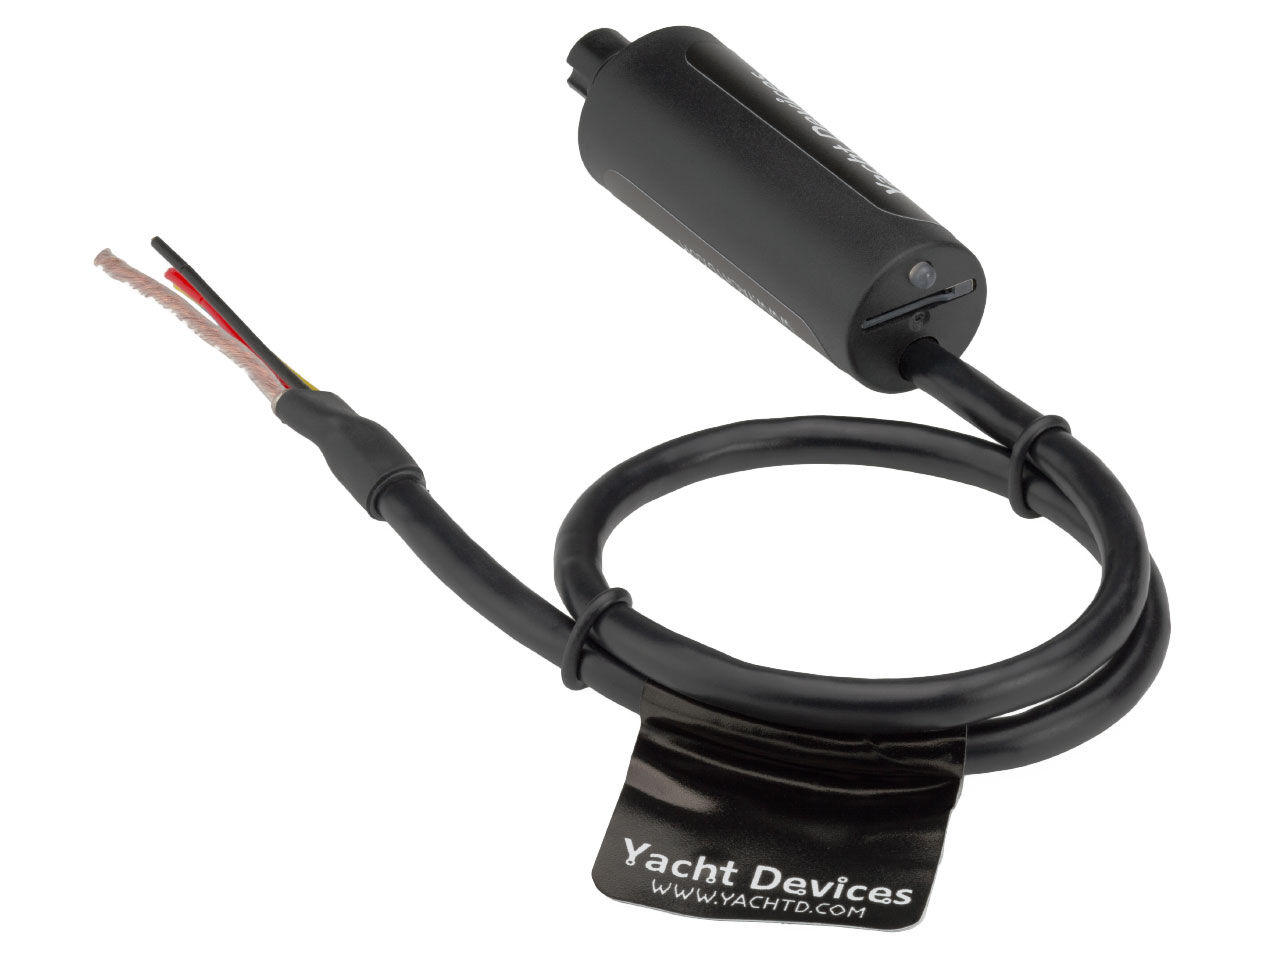 Yacht Devices NMEA0183 Interface YDNG-03 Adapter